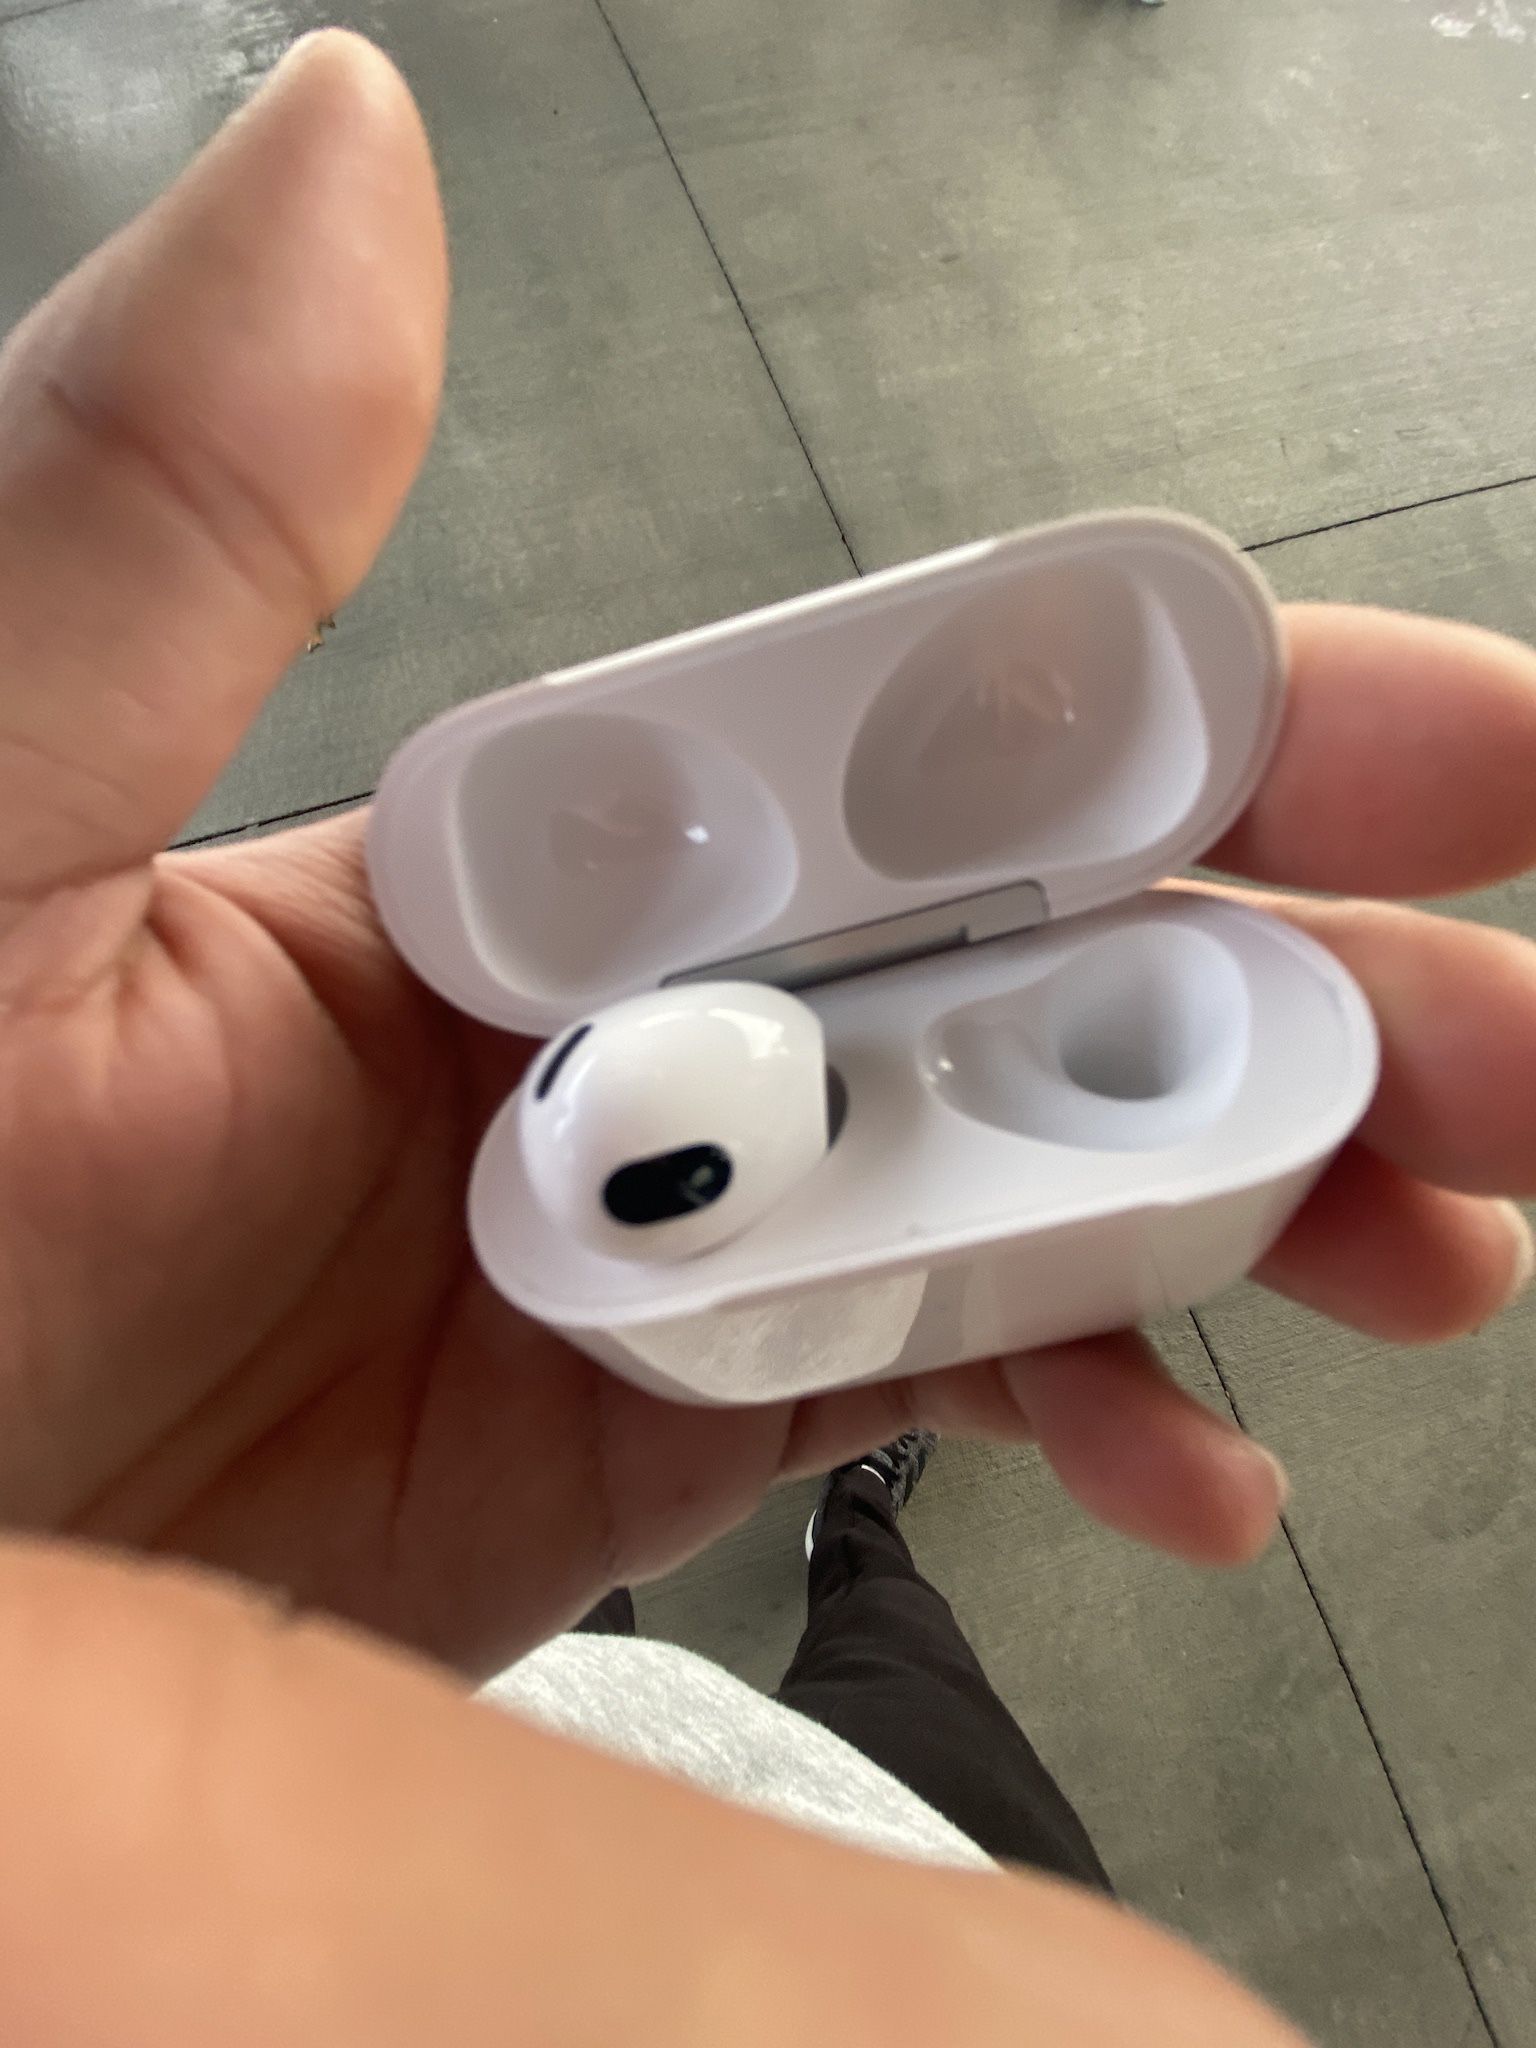 AirPod 3rd Gen (only Case And Left AirPod)